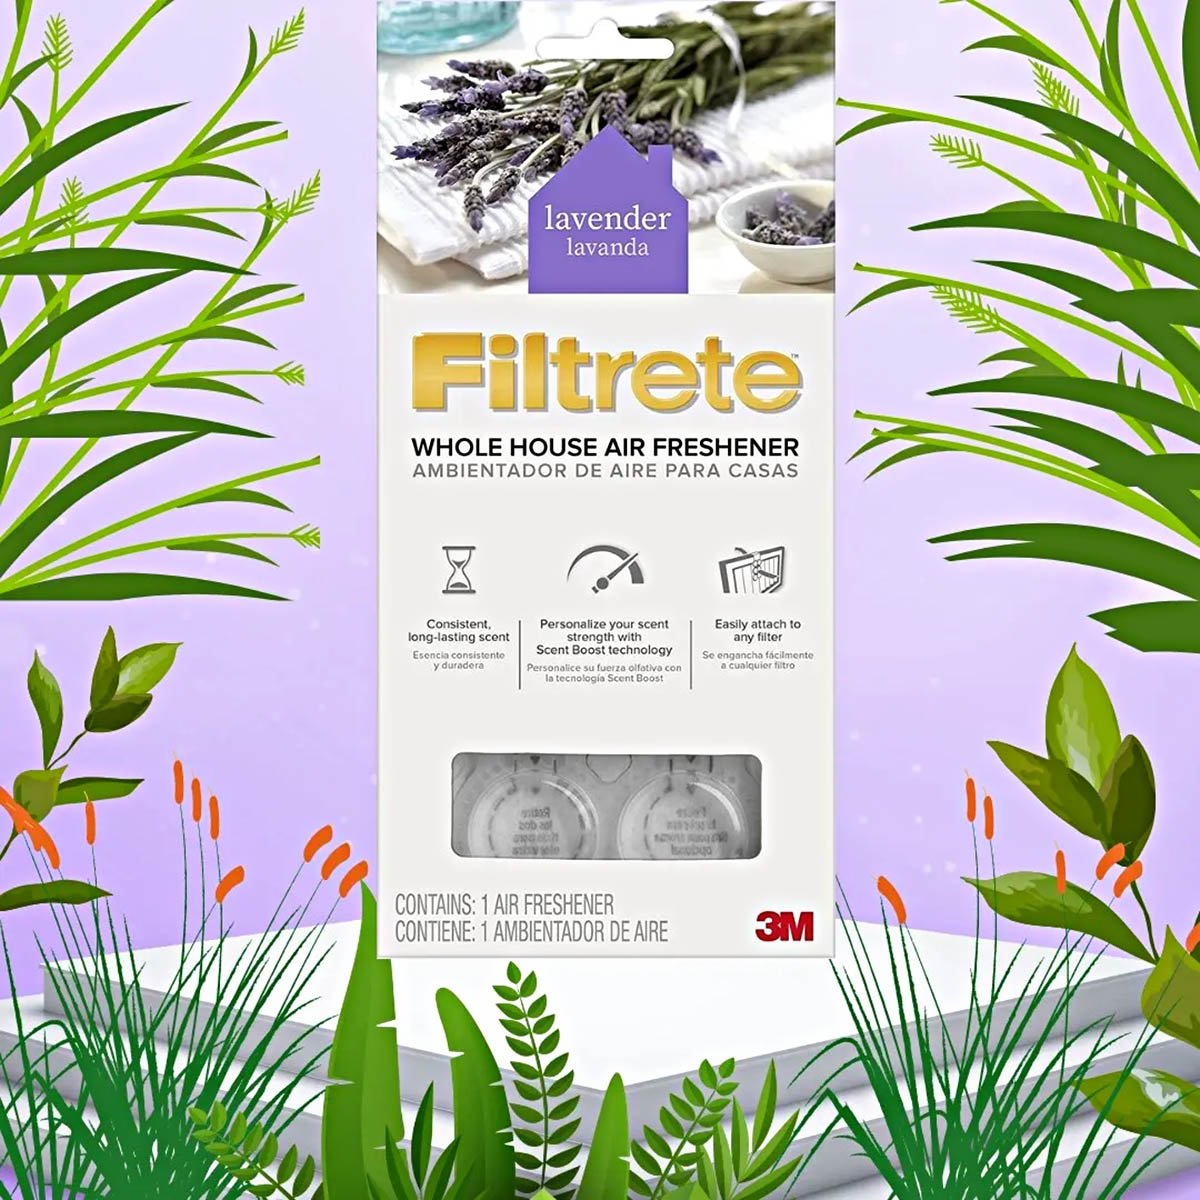 How To Install Filtrete Air Freshener